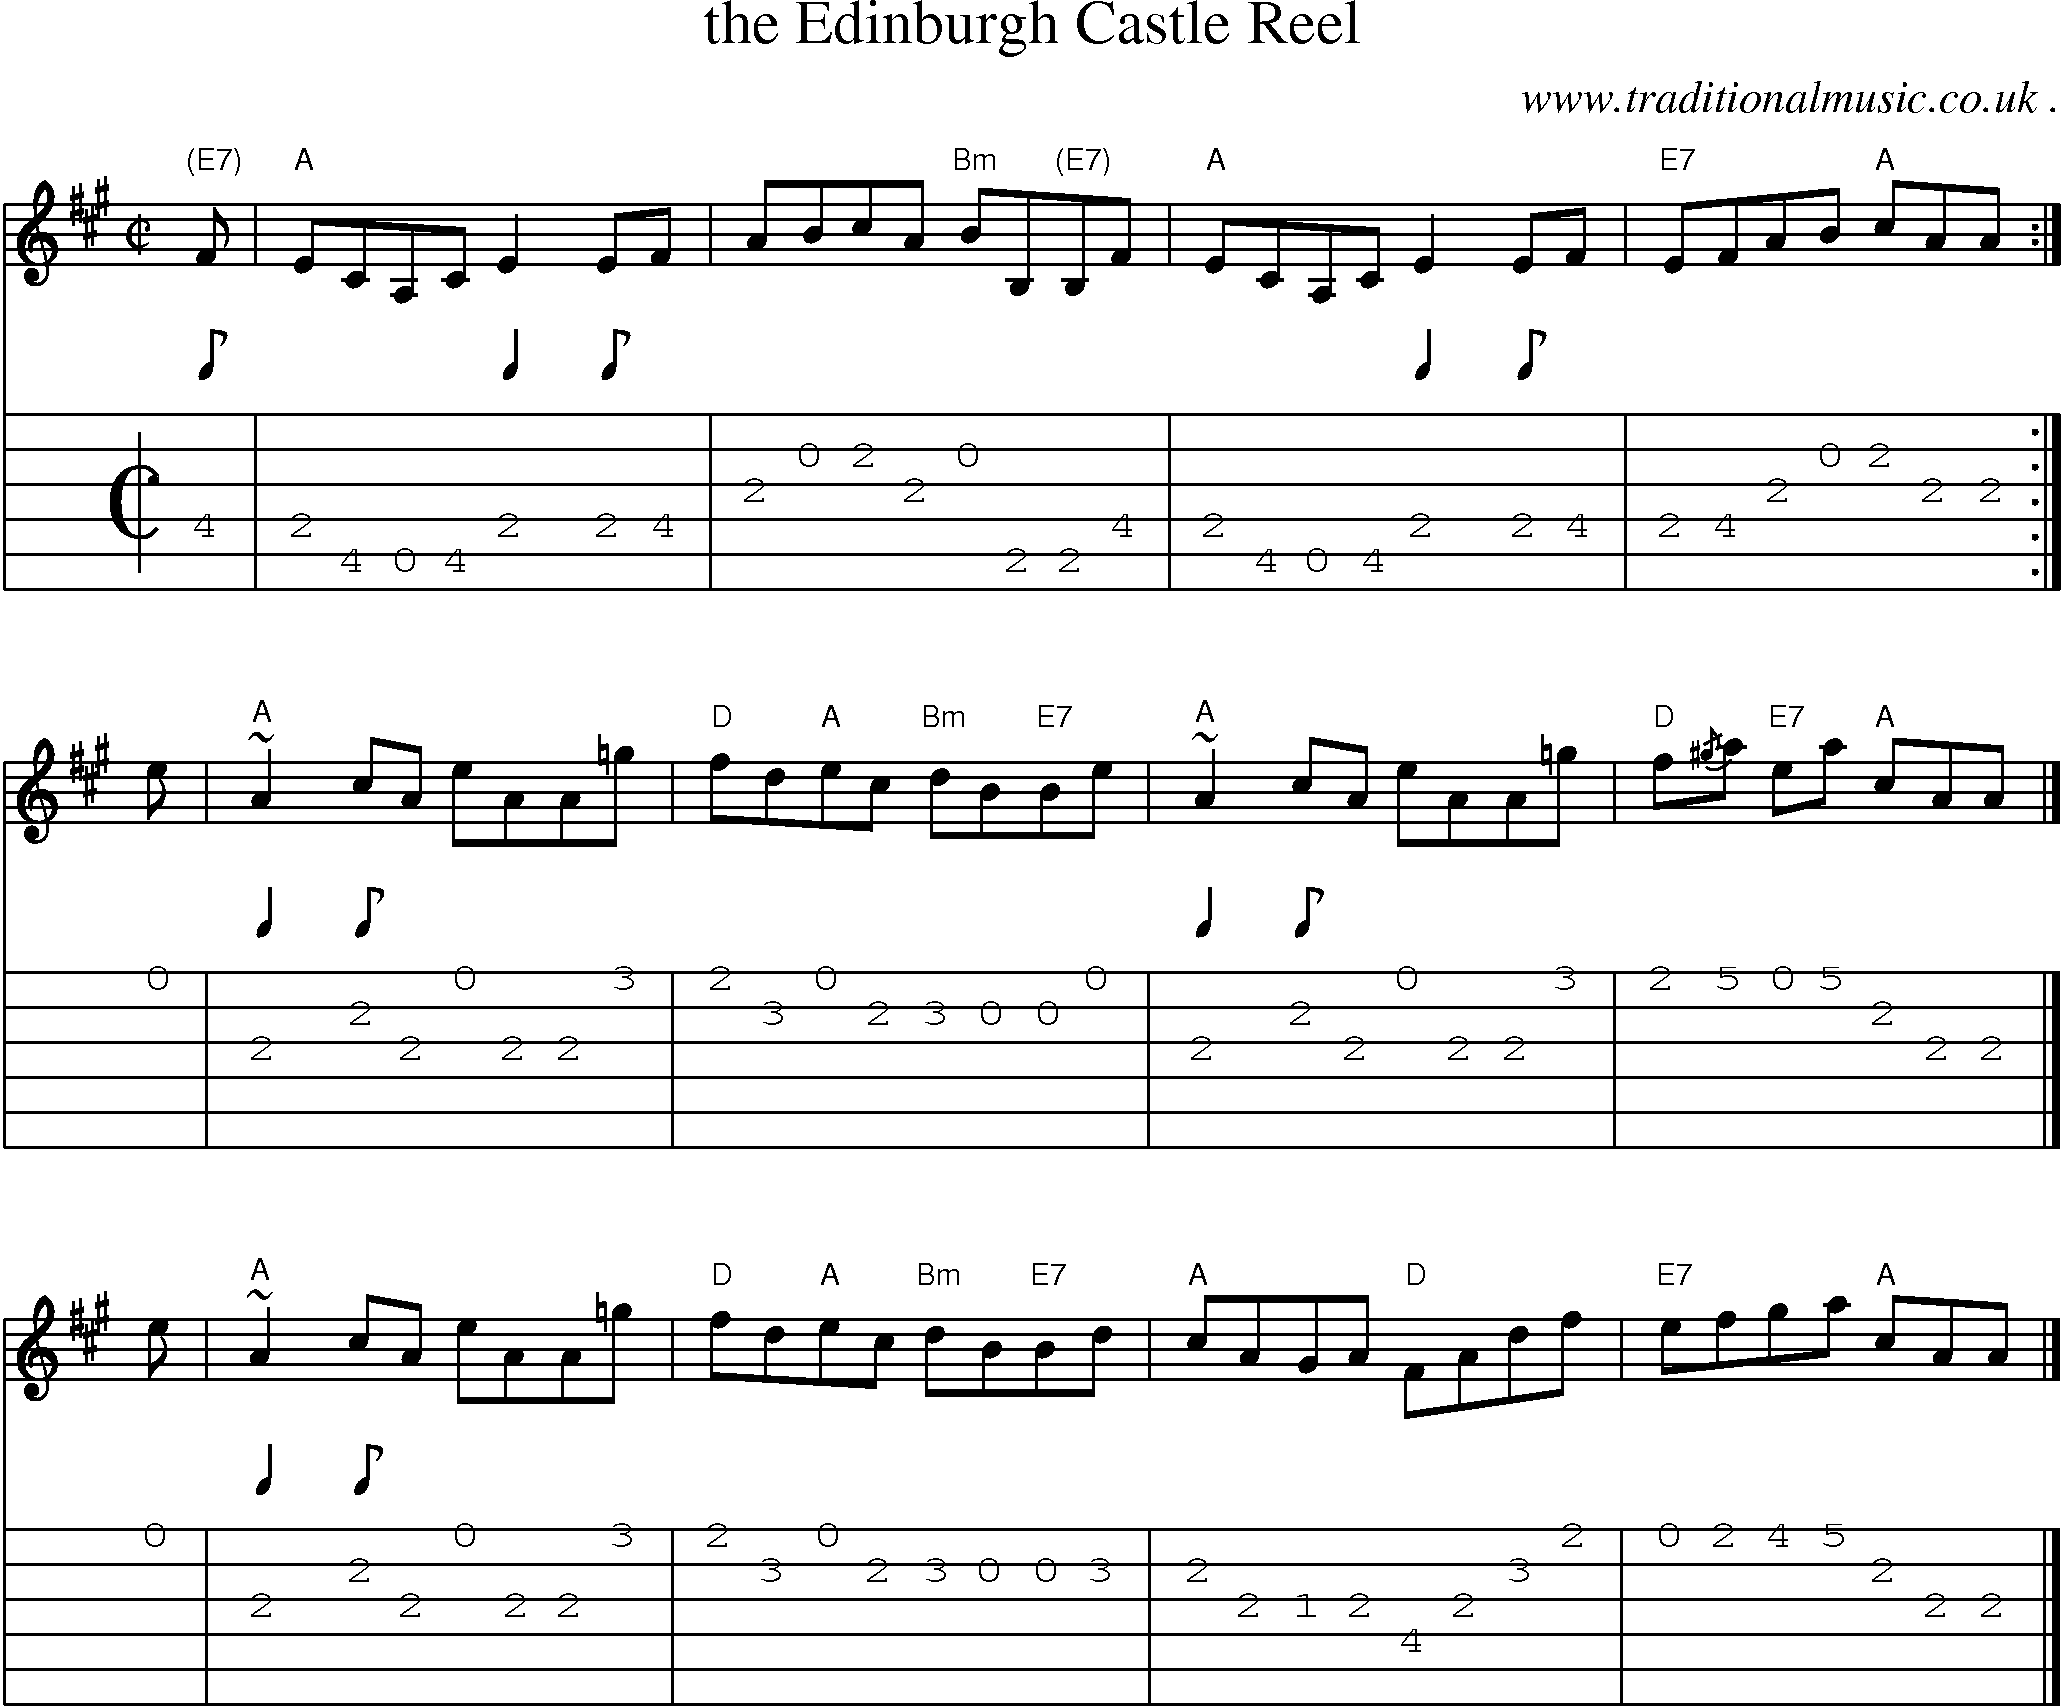 Sheet-music  score, Chords and Guitar Tabs for The Edinburgh Castle Reel